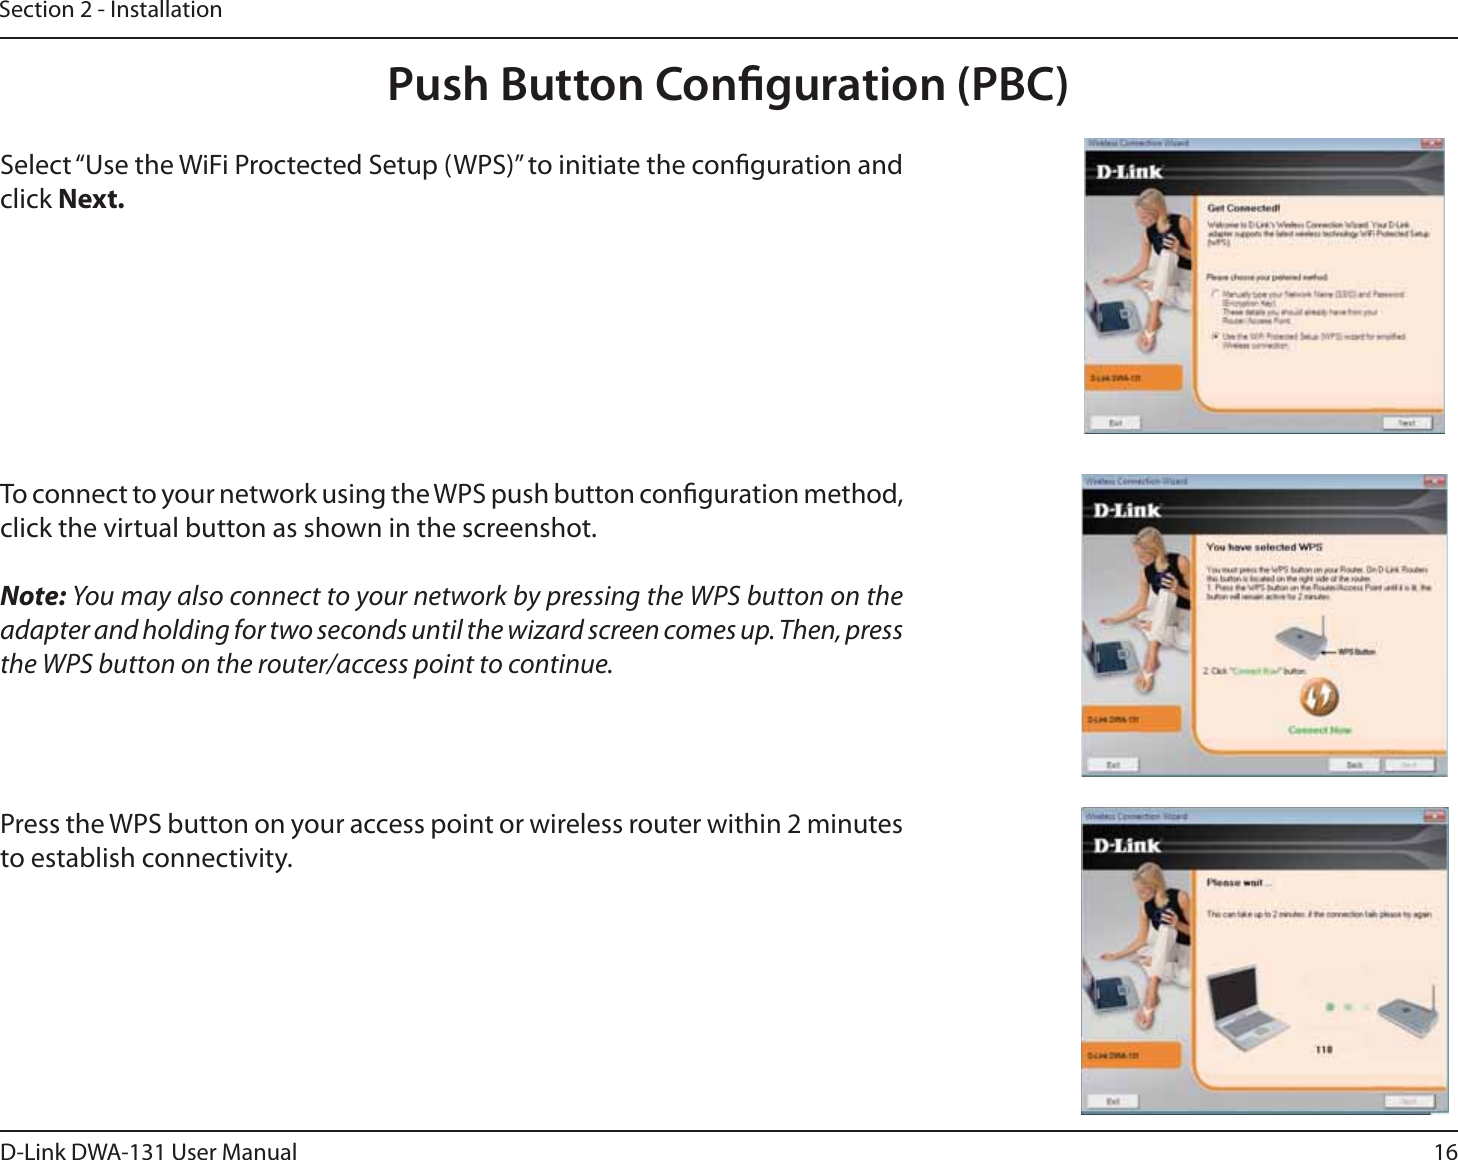 16D-Link DWA-131 User ManualSection 2 - InstallationPush Button Conguration (PBC)To connect to your network using the WPS push button conguration method, click the virtual button as shown in the screenshot. Note: You may also connect to your network by pressing the WPS button on the adapter and holding for two seconds until the wizard screen comes up. Then, press the WPS button on the router/access point to continue.  Press the WPS button on your access point or wireless router within 2 minutes to establish connectivity.  Select “Use the WiFi Proctected Setup (WPS)” to initiate the conguration and click Next.